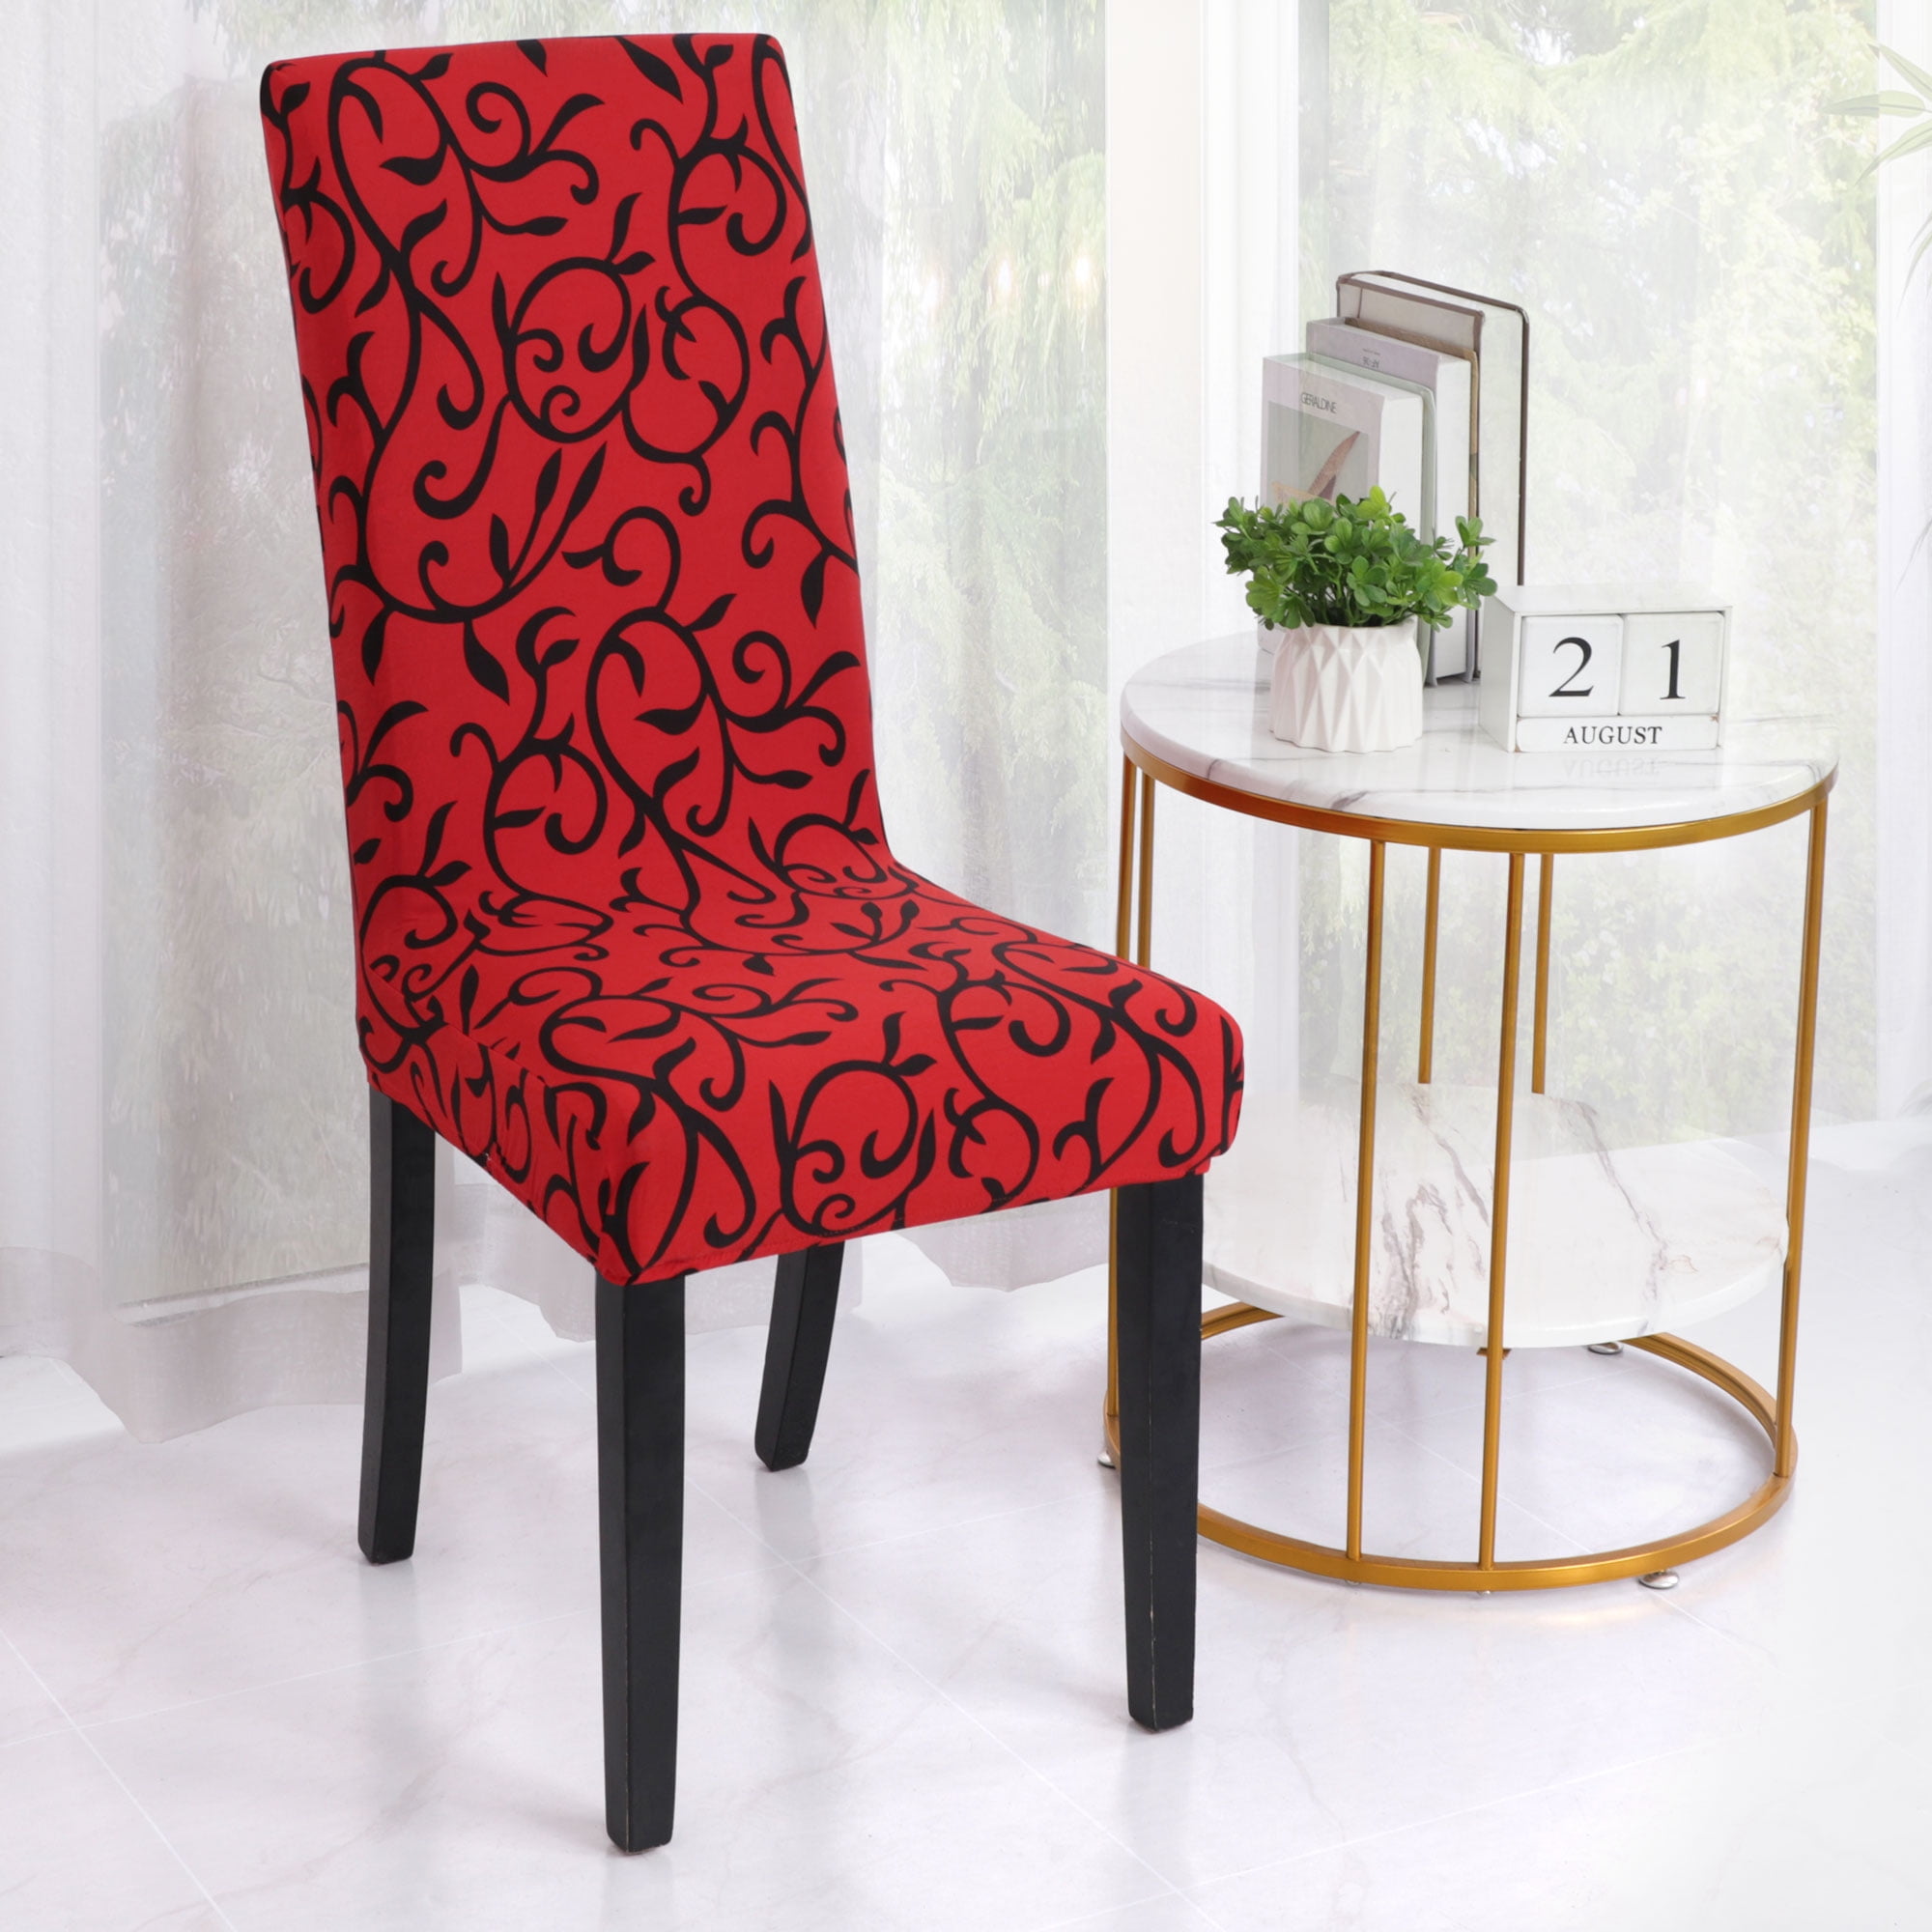 CLEARANCE-VELVET "STRETCH" DAMASK DINING CHAIR COVER--BURGUNDY-COMES IN 4 COLORS 